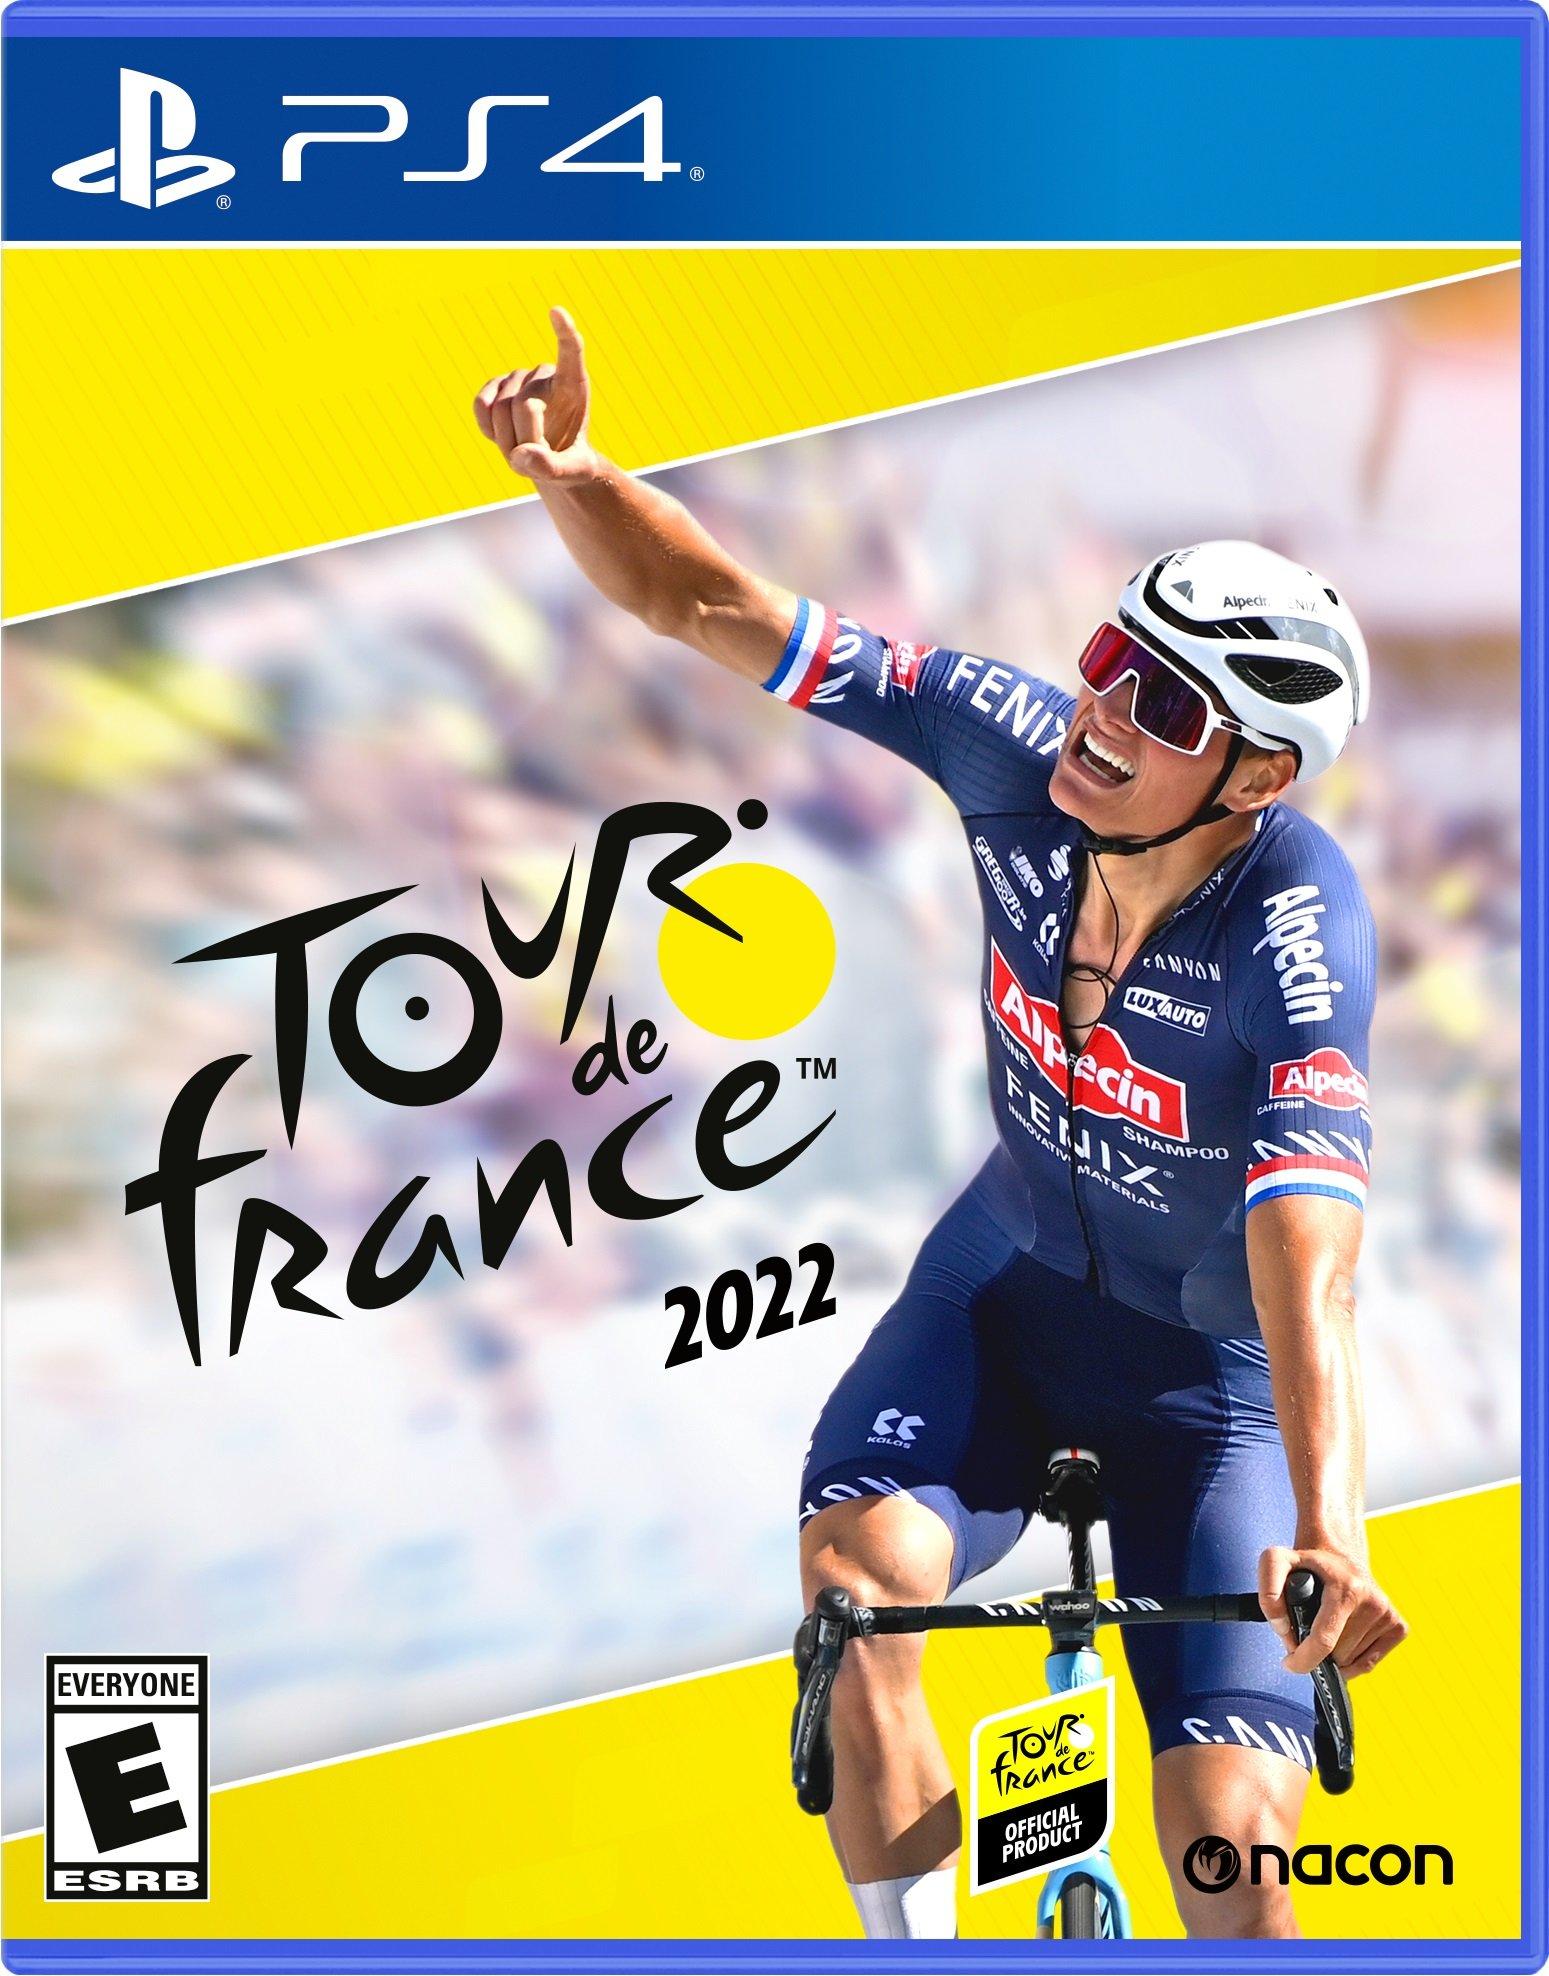 Tour de France 2022  Download and Buy Today - Epic Games Store